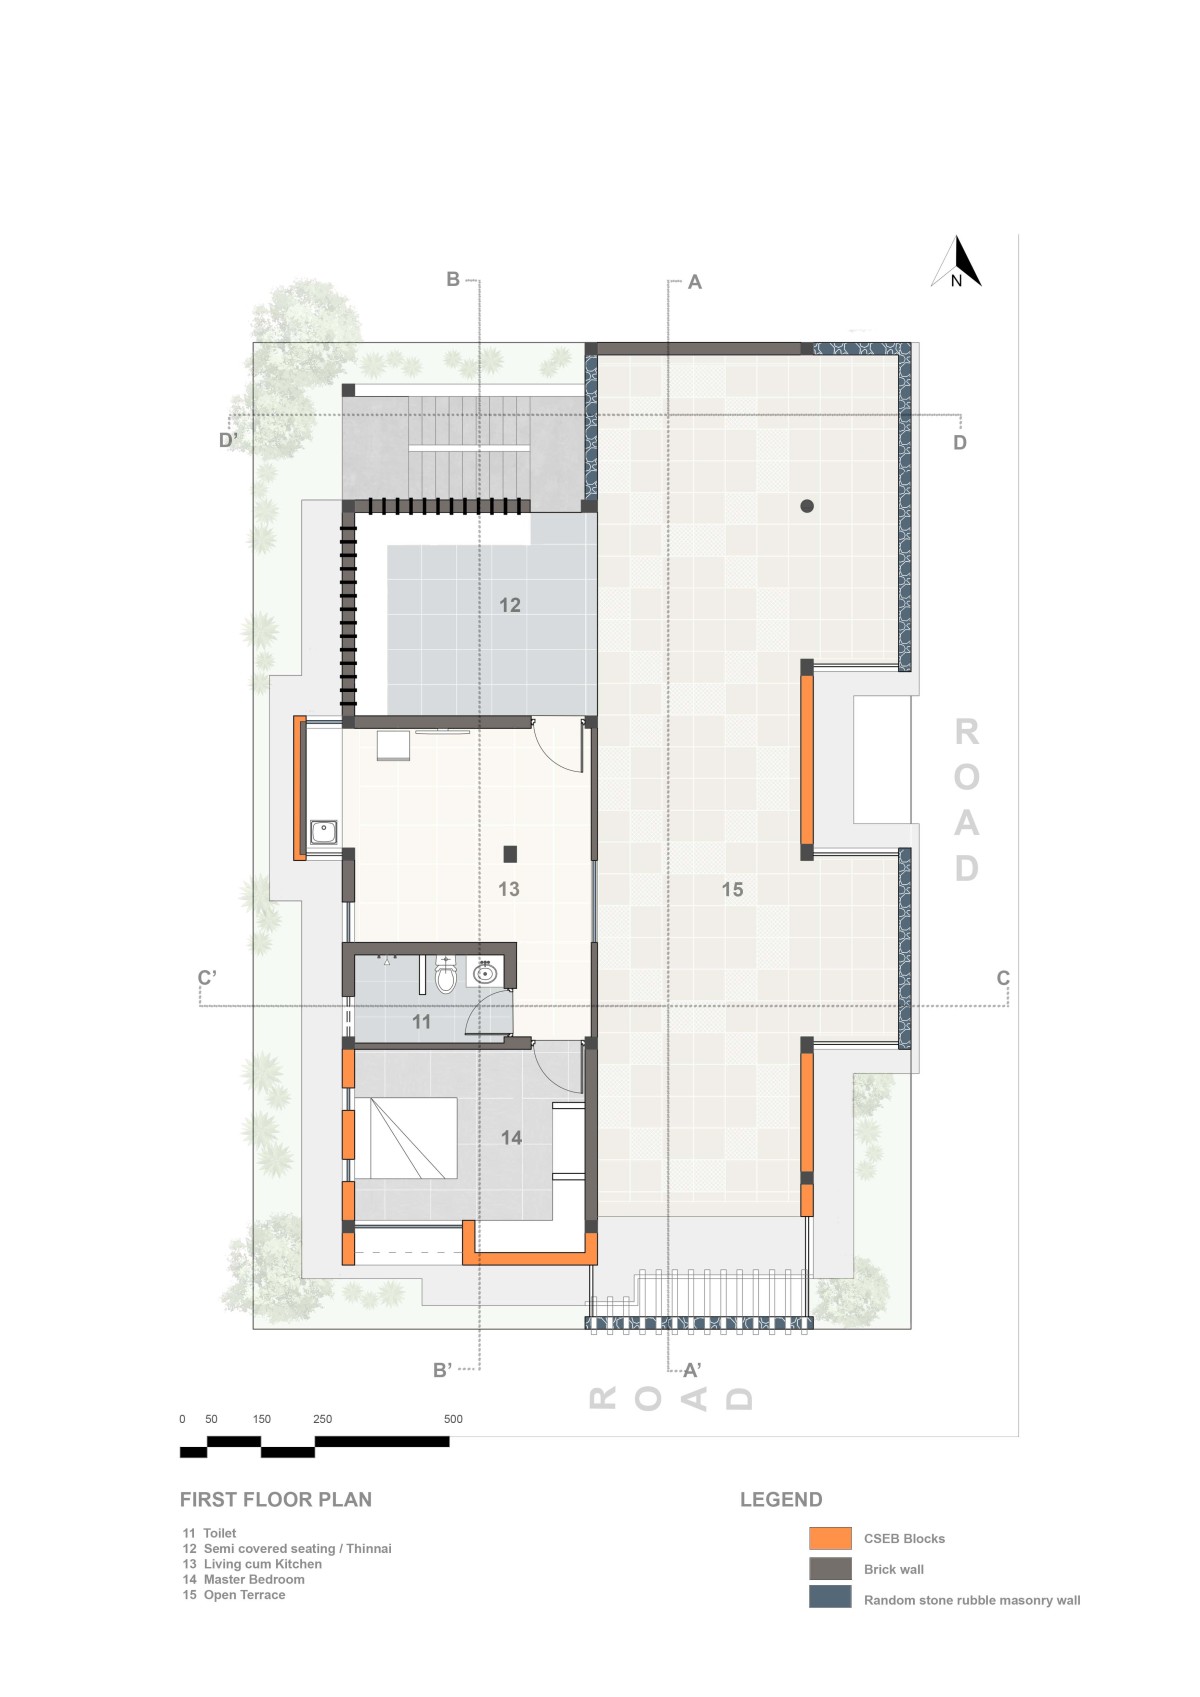 First floor plan of Alamu Nilayam by RP Architects